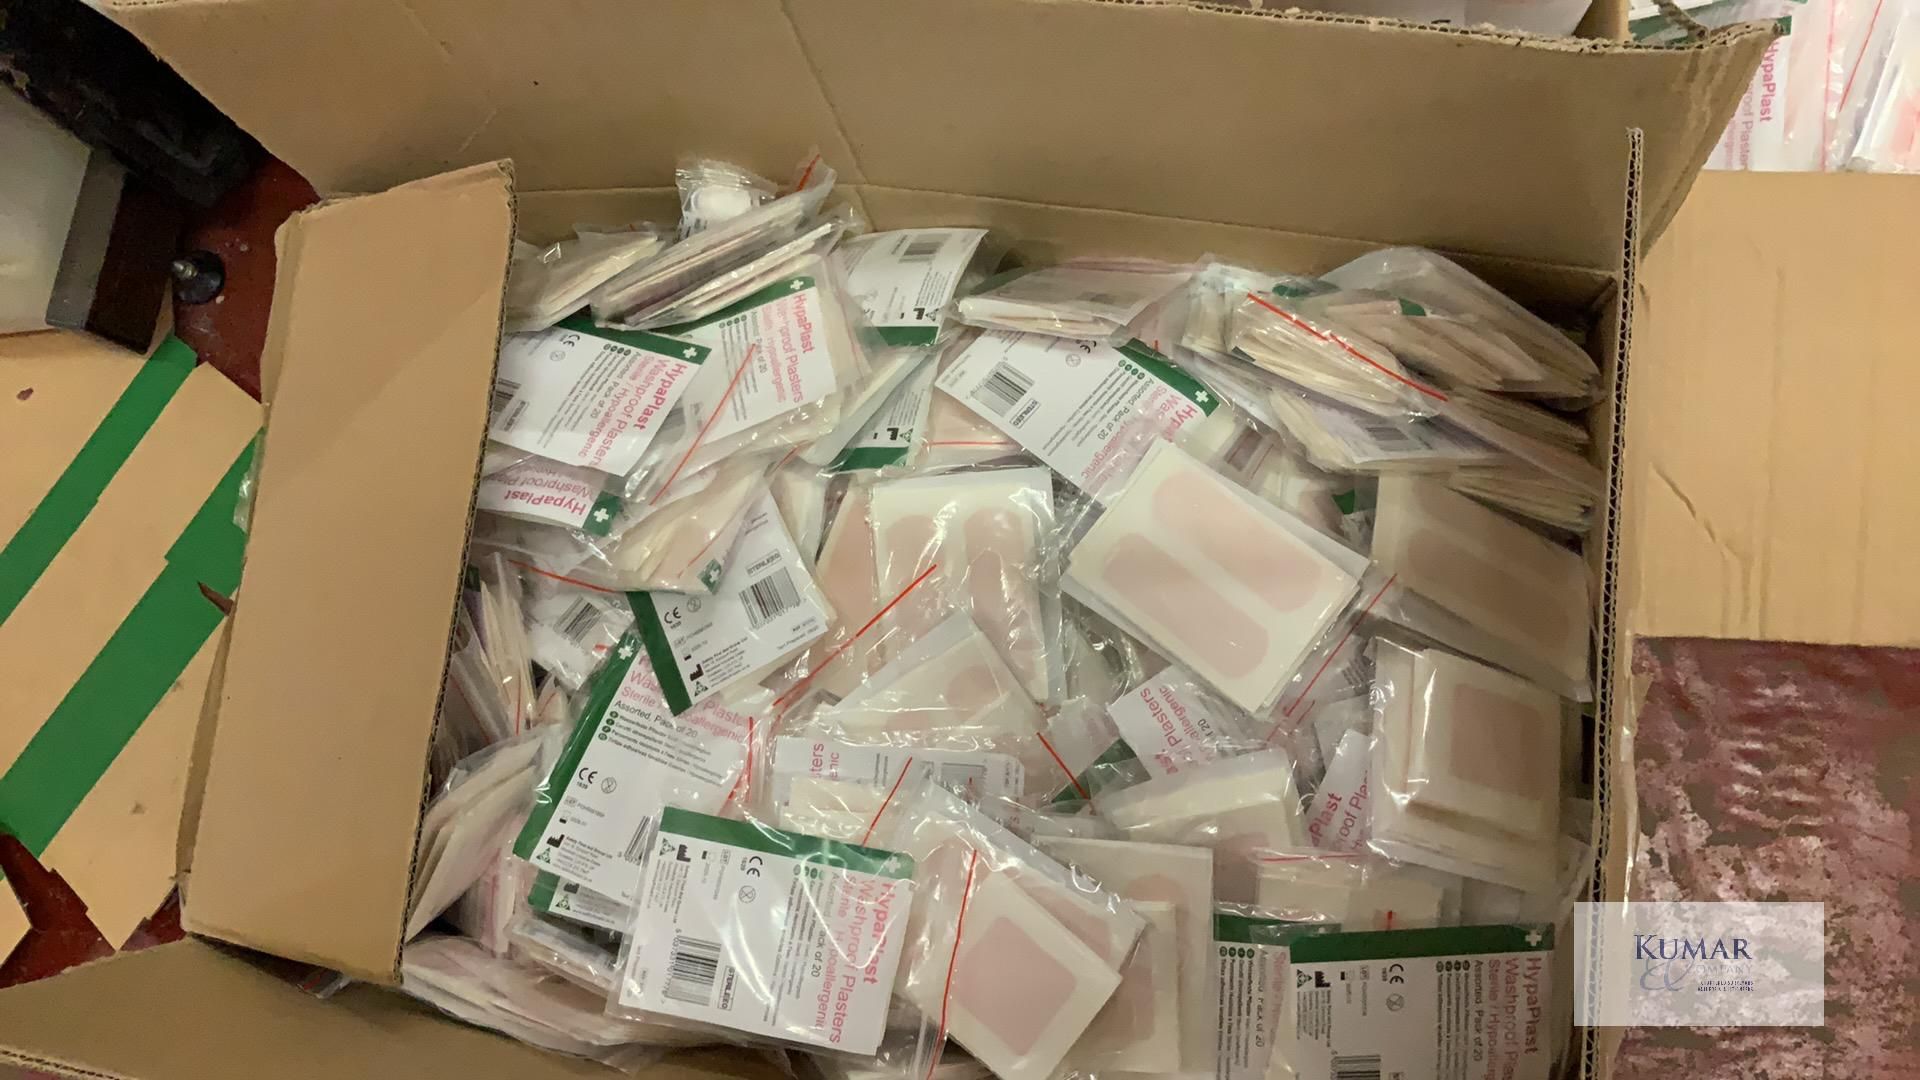 4: Large Boxes of 20 HypaPlast Sterile Washproof Assorted Plasters (10/2025) - Thousands of - Image 7 of 7